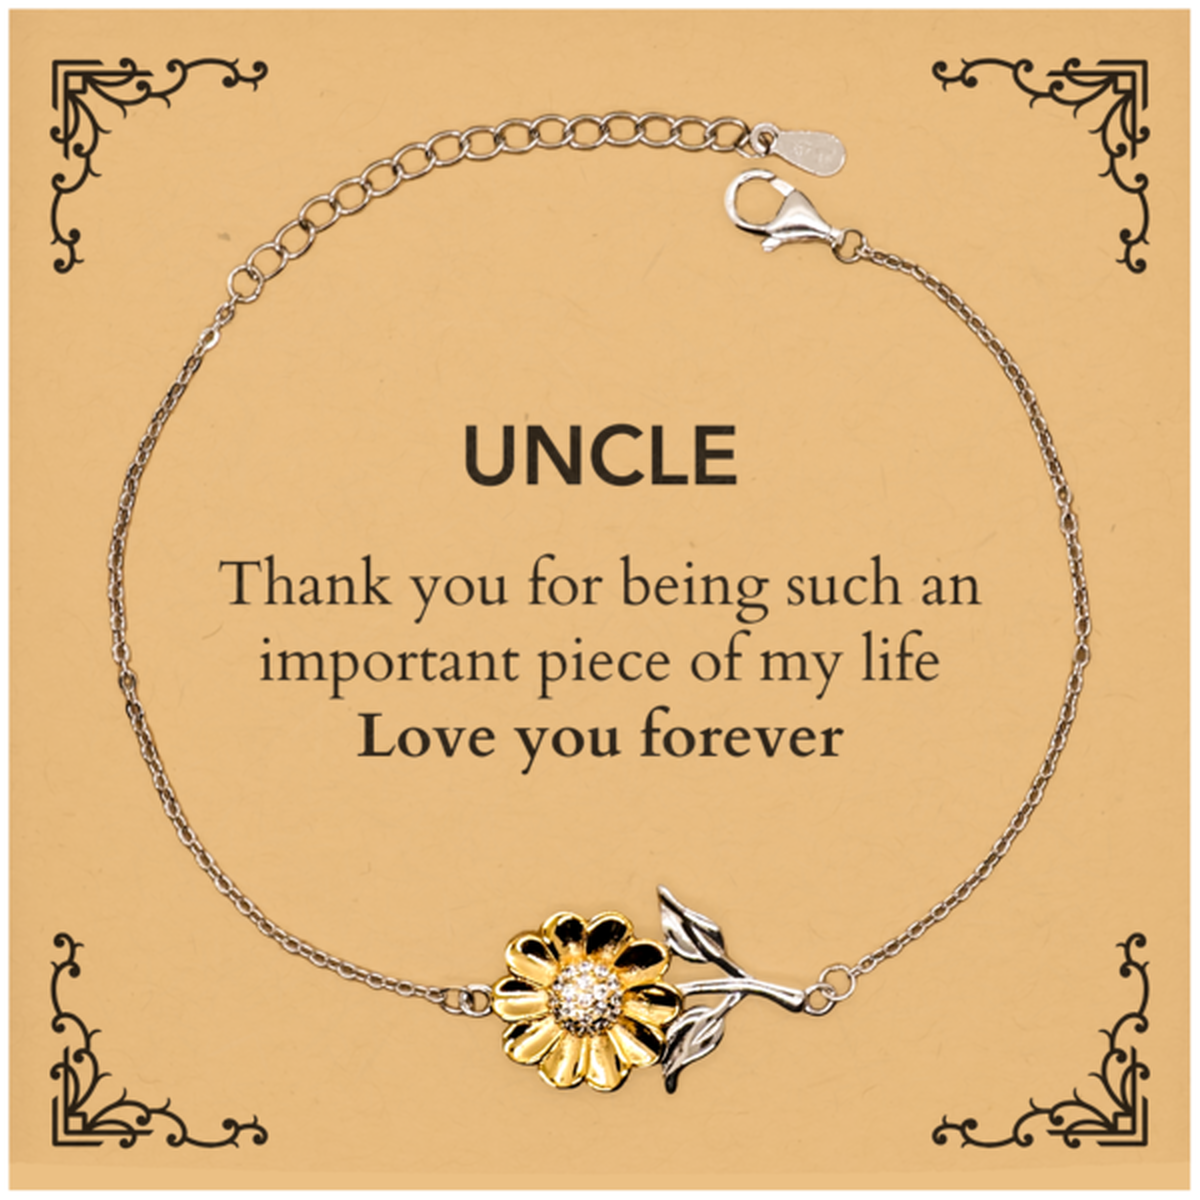 Appropriate Uncle Sunflower Bracelet Epic Birthday Gifts for Uncle Thank you for being such an important piece of my life Uncle Christmas Mothers Fathers Day